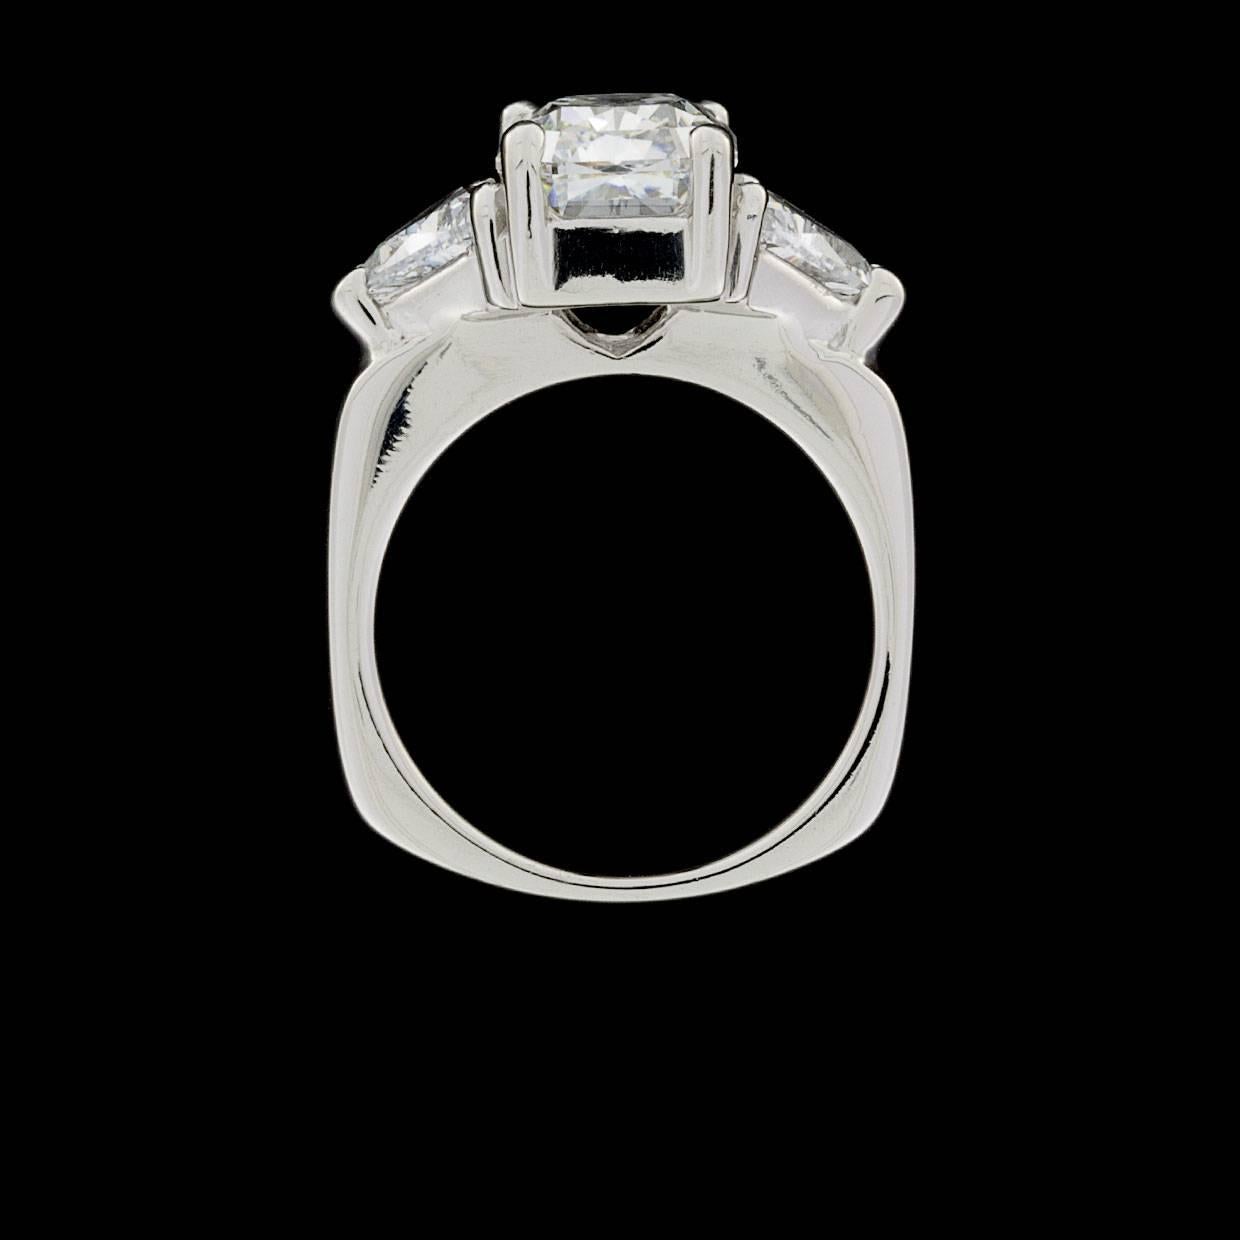 Magnificent Colorless Radiant and Triangle GIA Certified Diamond Engagement Ring In Excellent Condition For Sale In Columbia, MO